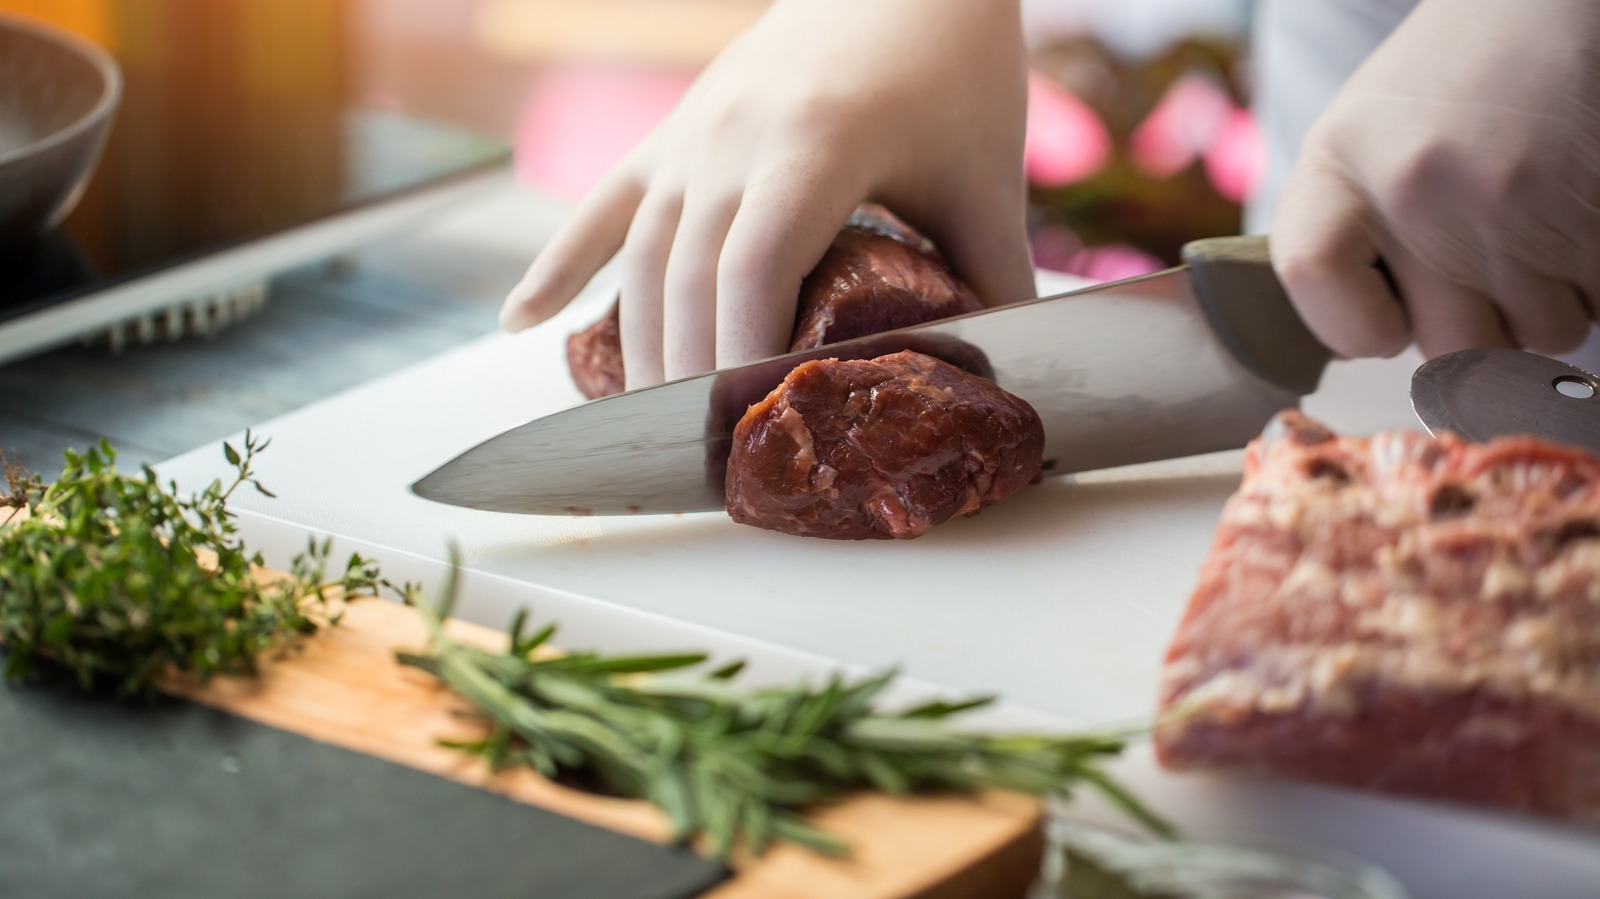 The 5 Best Advantages Of Using A Rubber Cutting Board